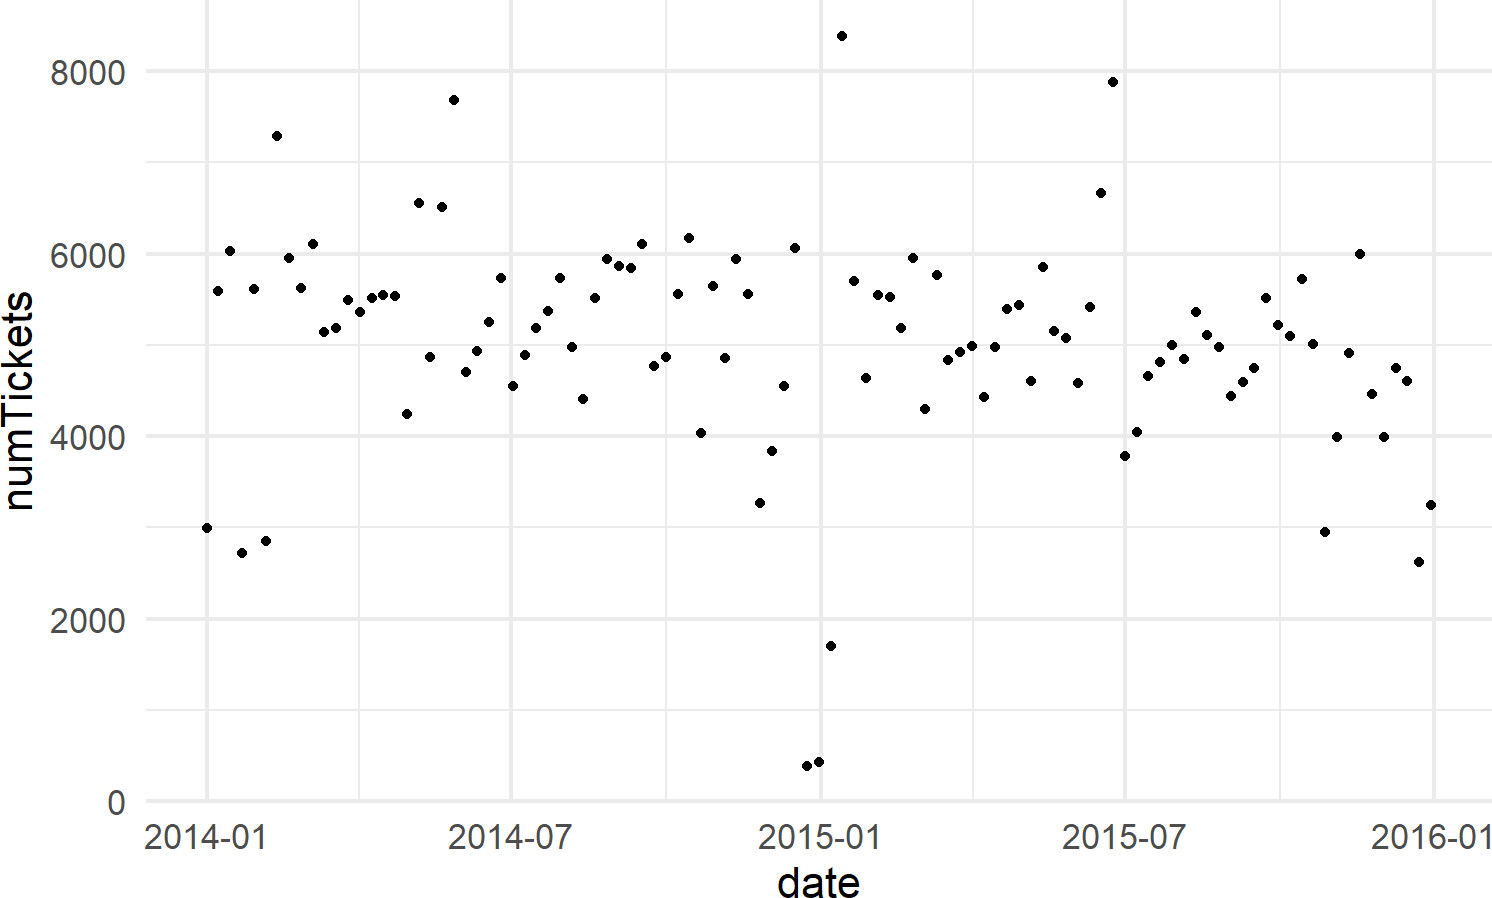 The number of daily traffic tickets issued in New York city from 2014-15.